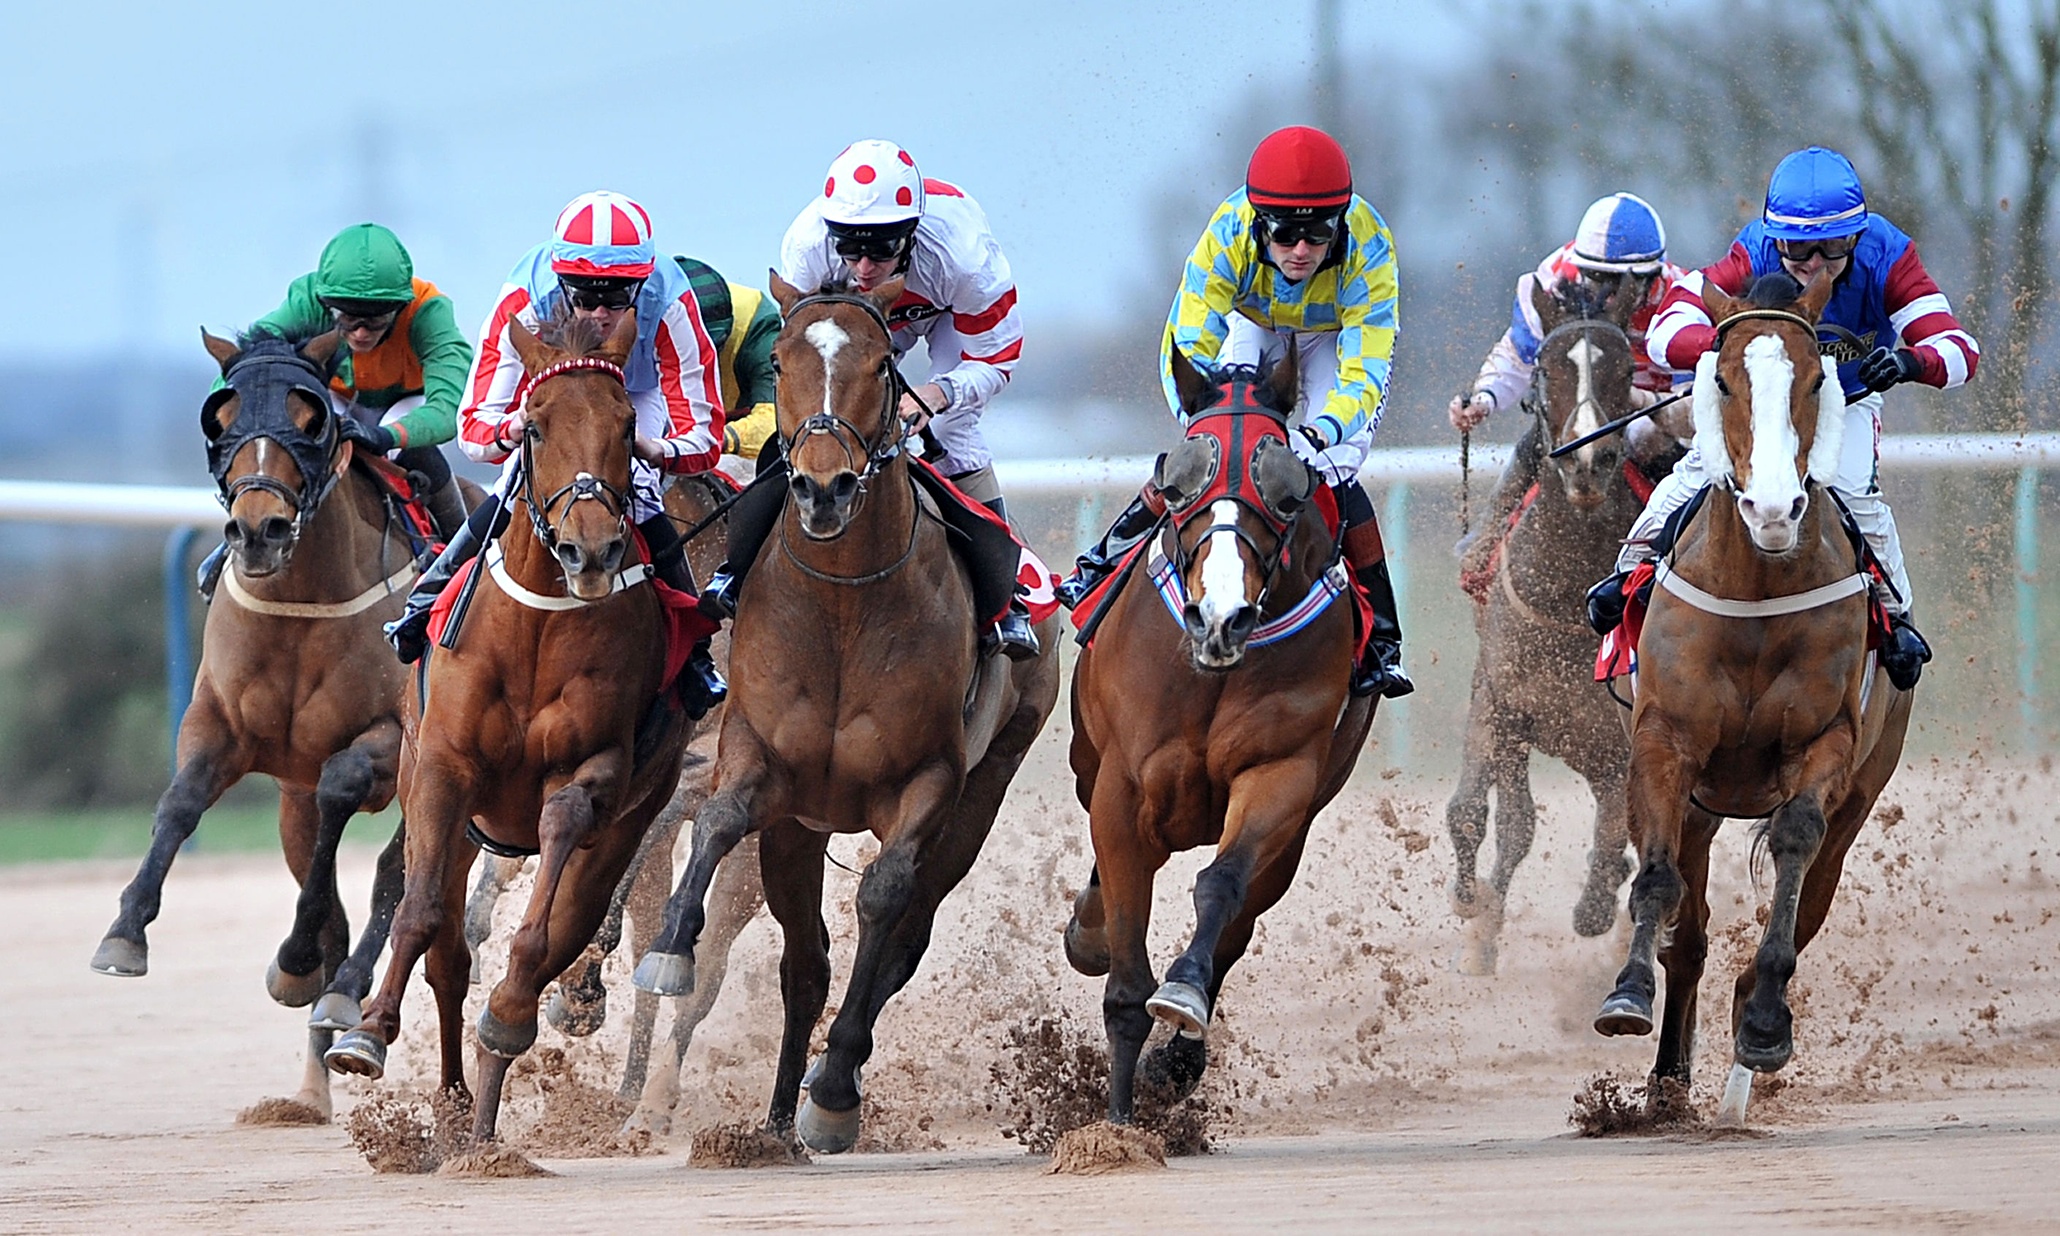 Amazing Horse Racing Pictures & Backgrounds